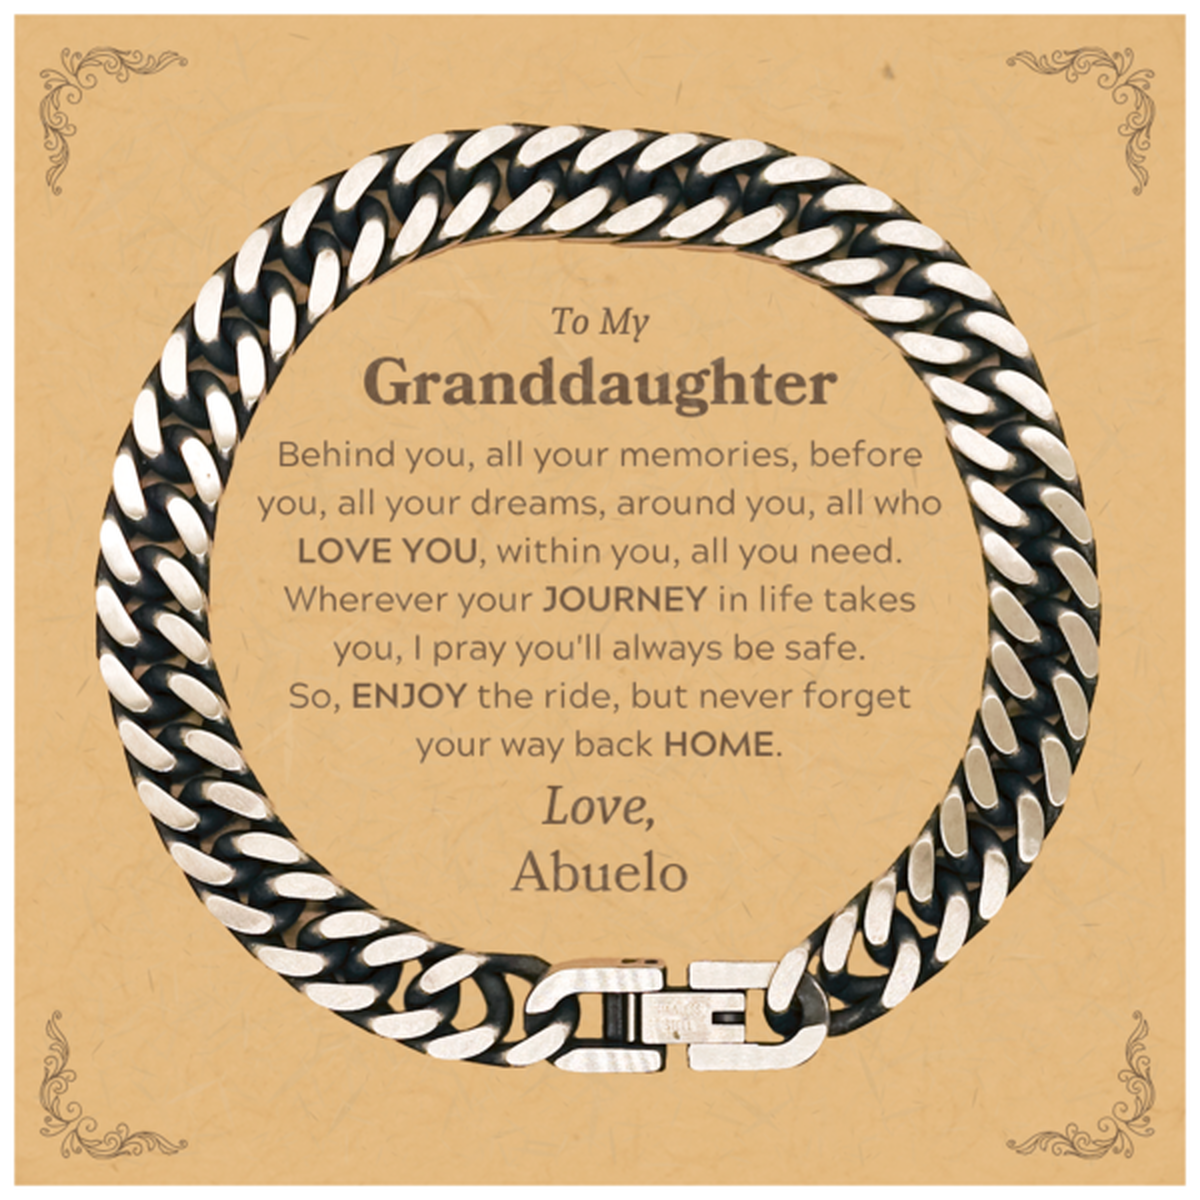 To My Granddaughter Graduation Gifts from Abuelo, Granddaughter Cuban Link Chain Bracelet Christmas Birthday Gifts for Granddaughter Behind you, all your memories, before you, all your dreams. Love, Abuelo